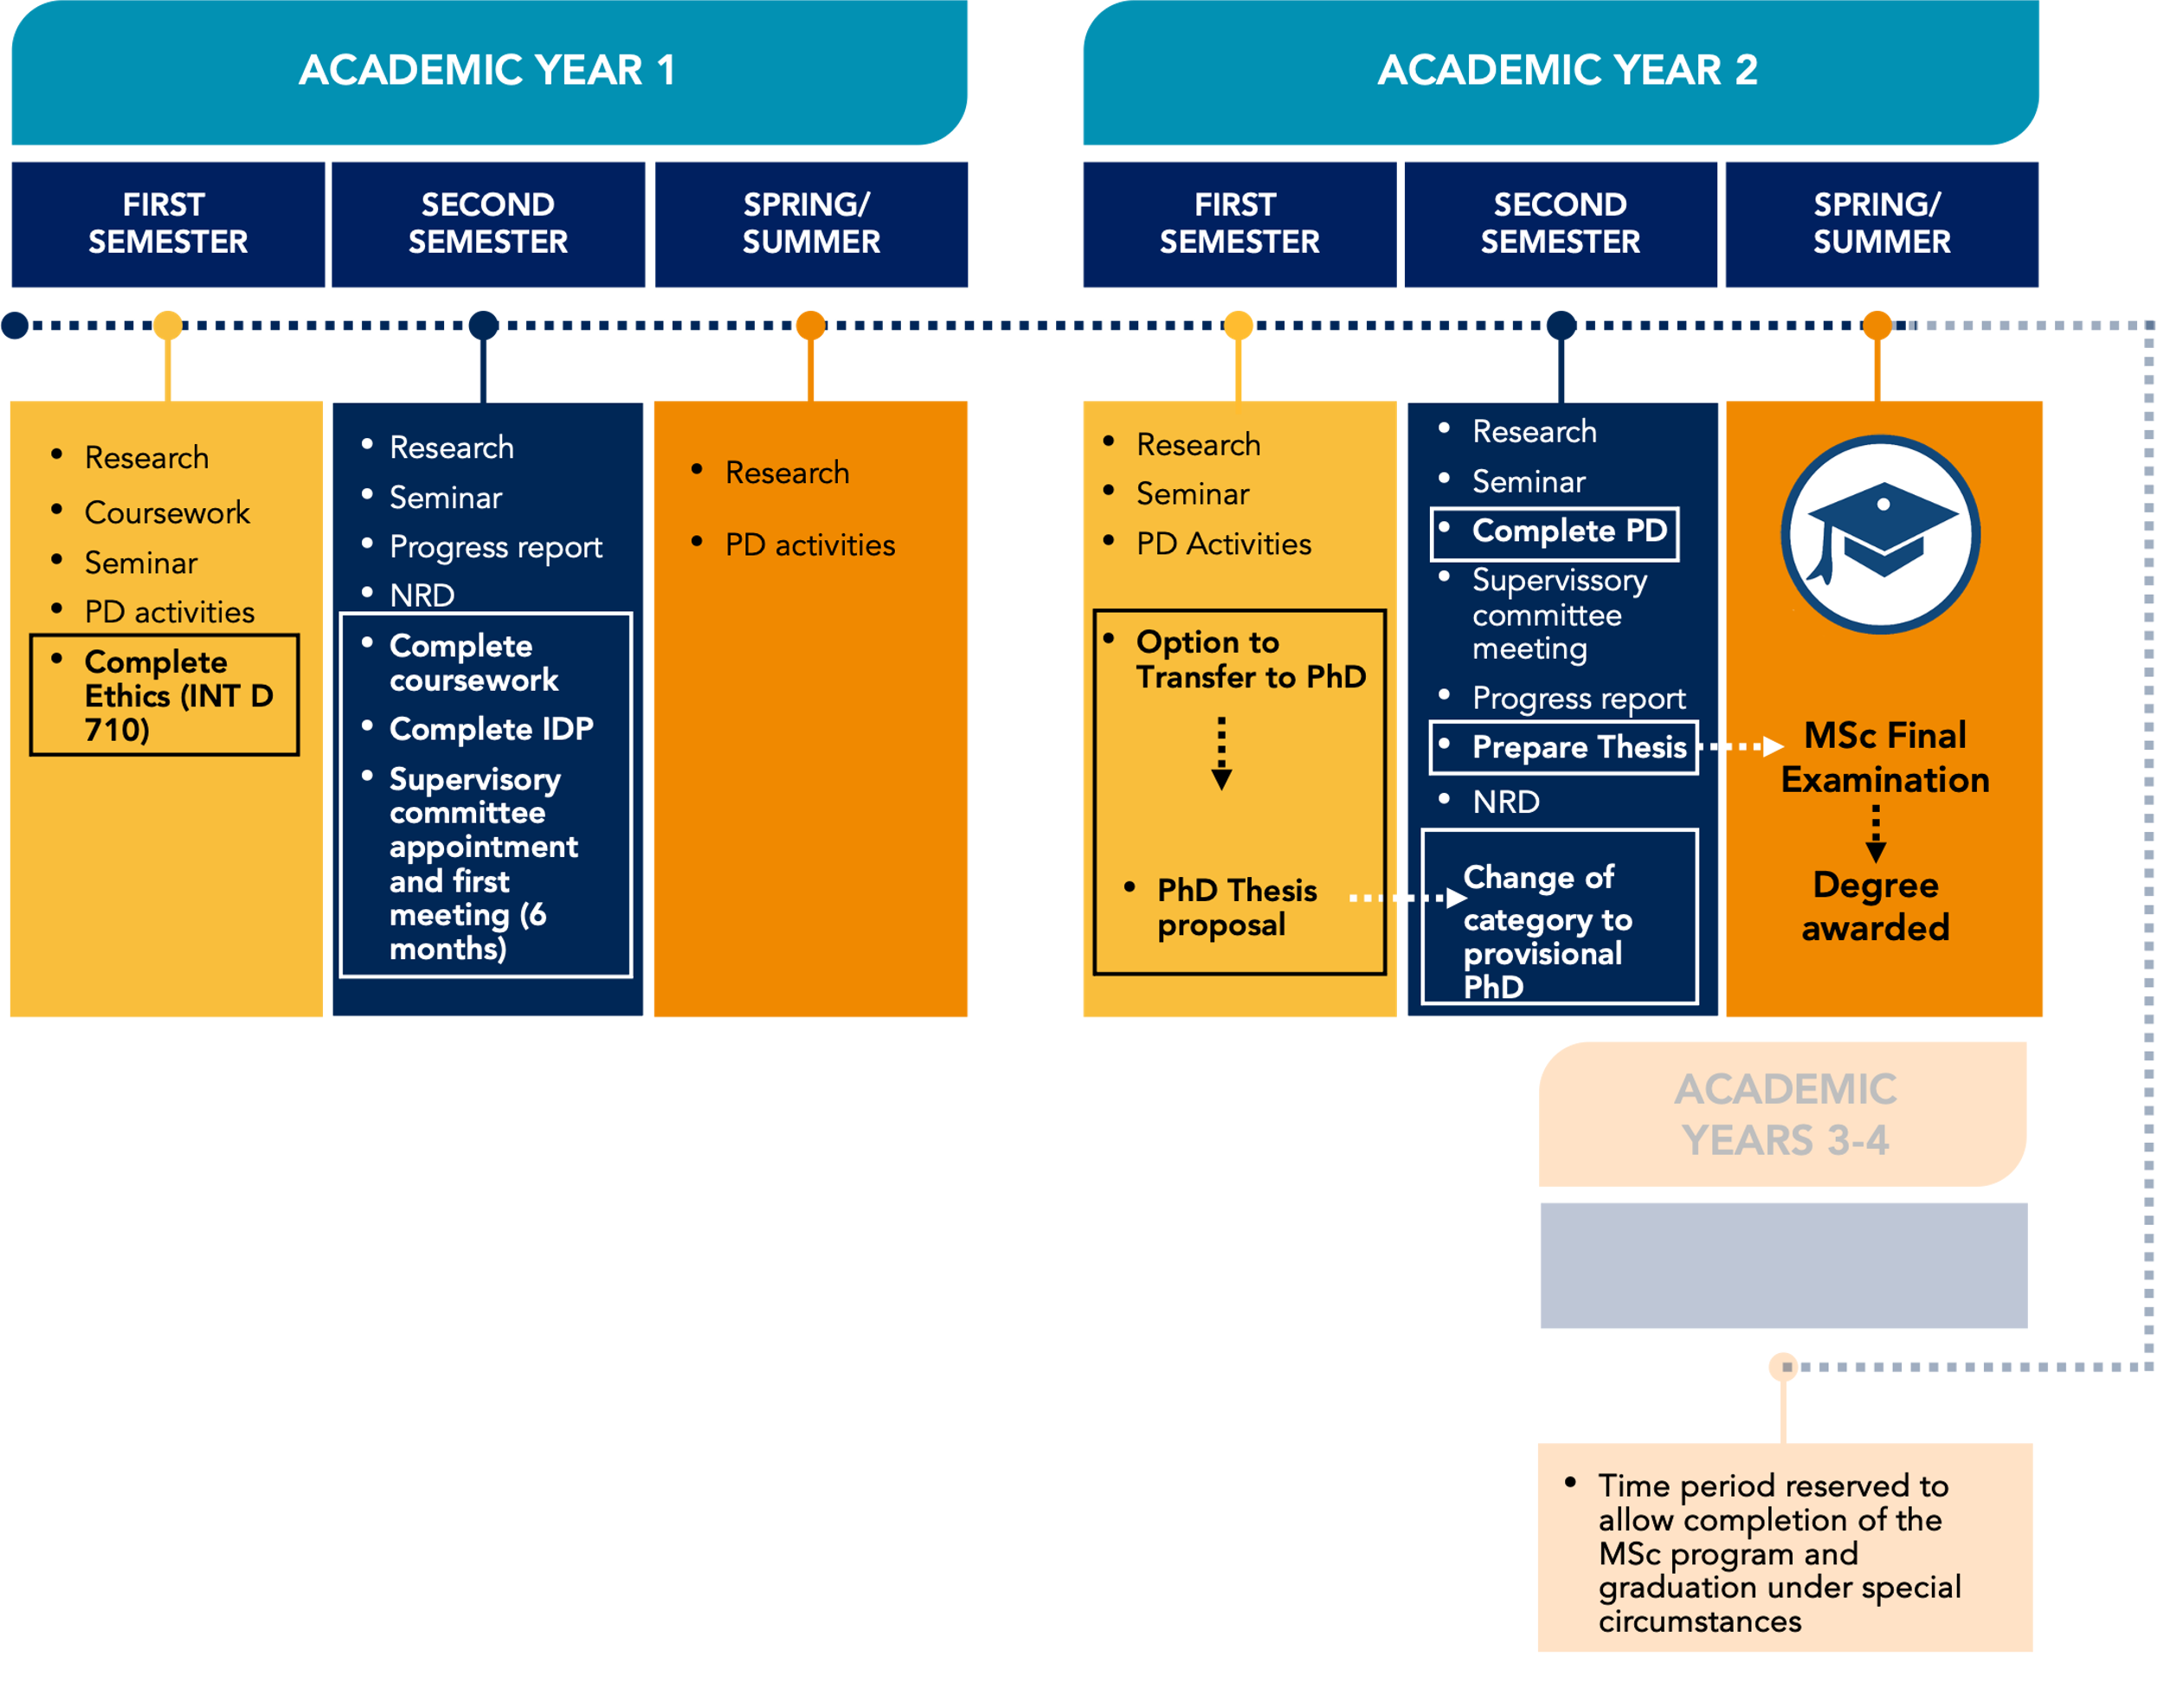 Structure of the MSc program